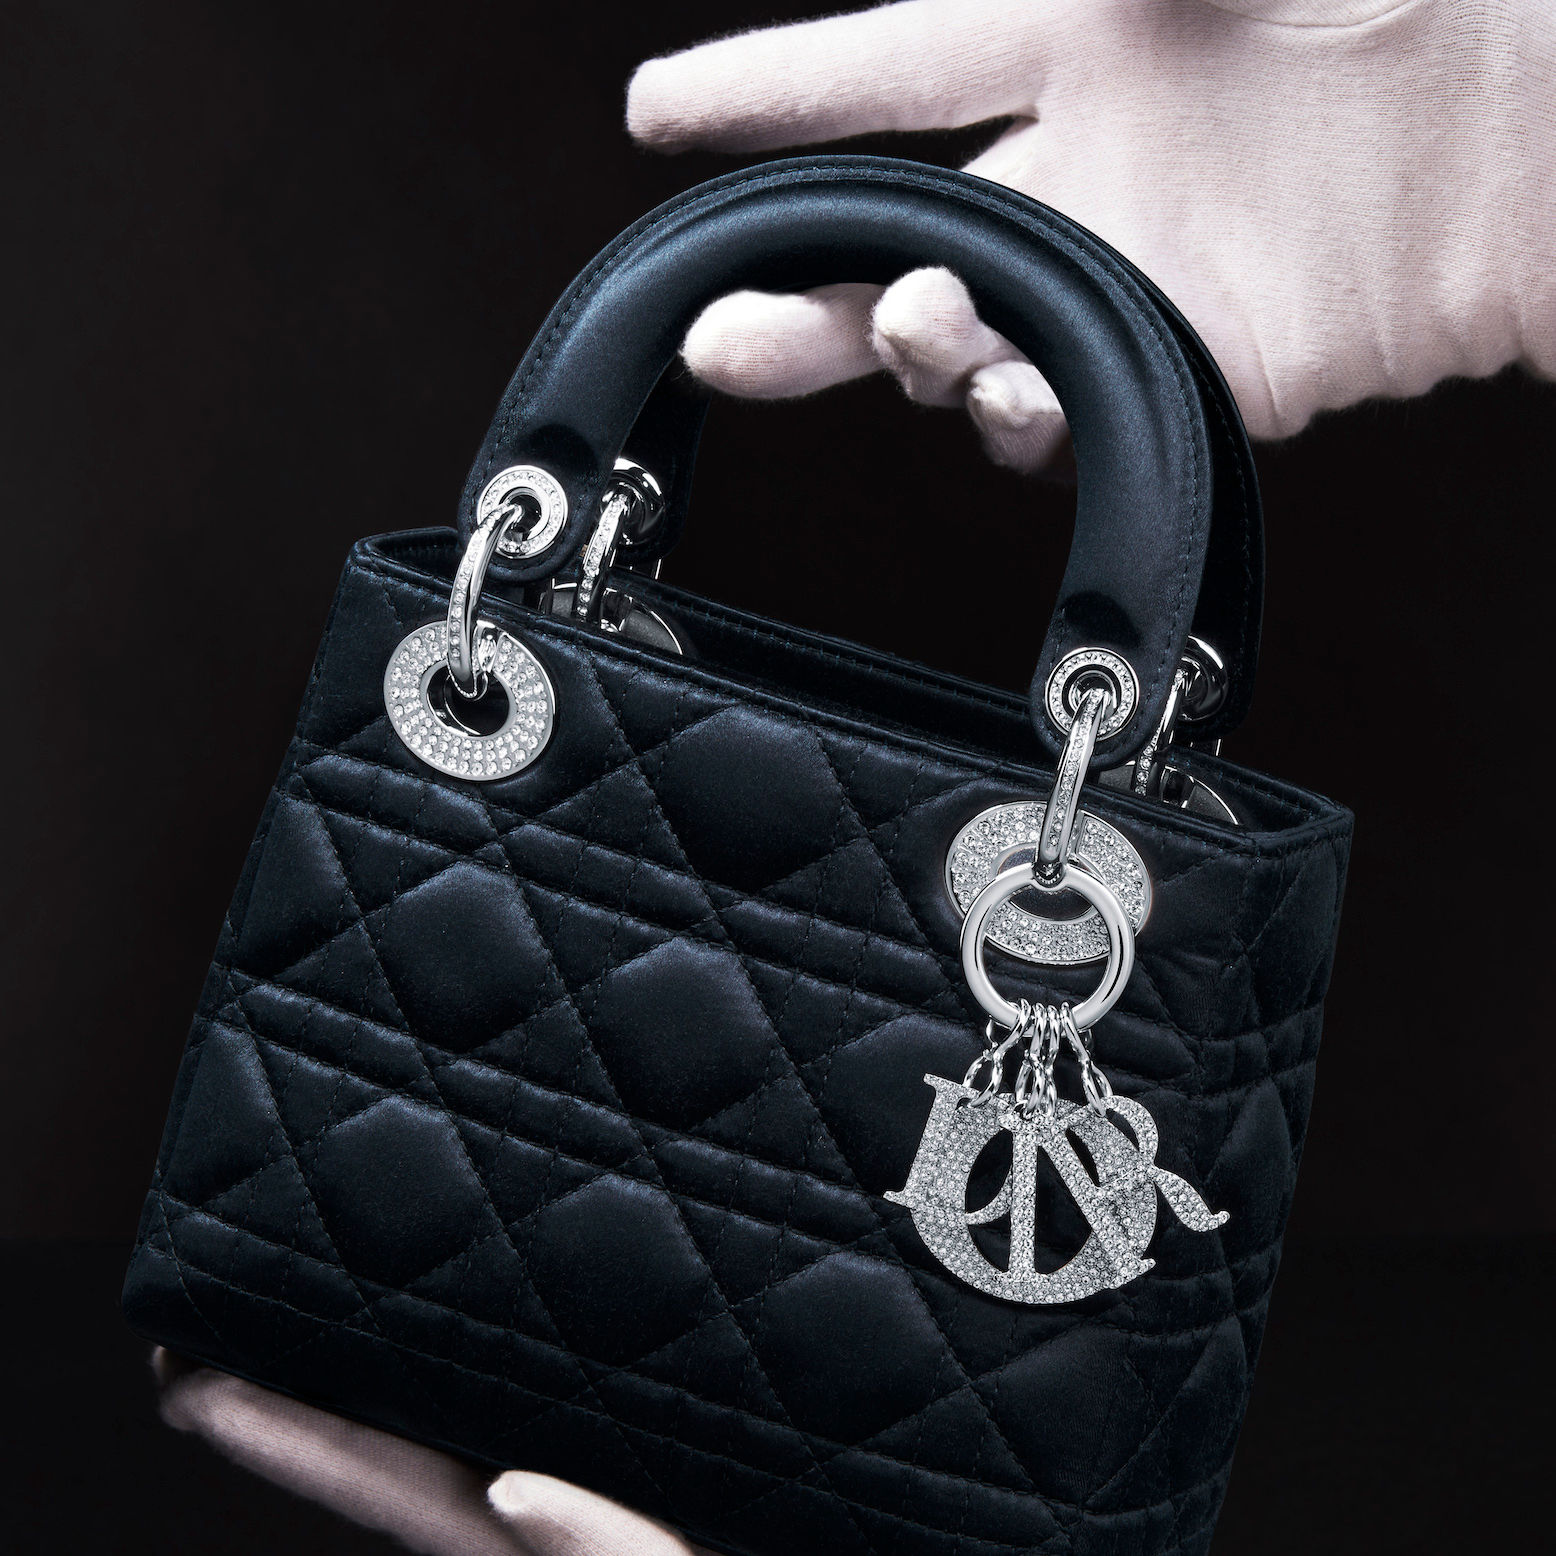 Dior Launches Re-Edition Of Princess Diana'S Iconic Lady Dior Bag